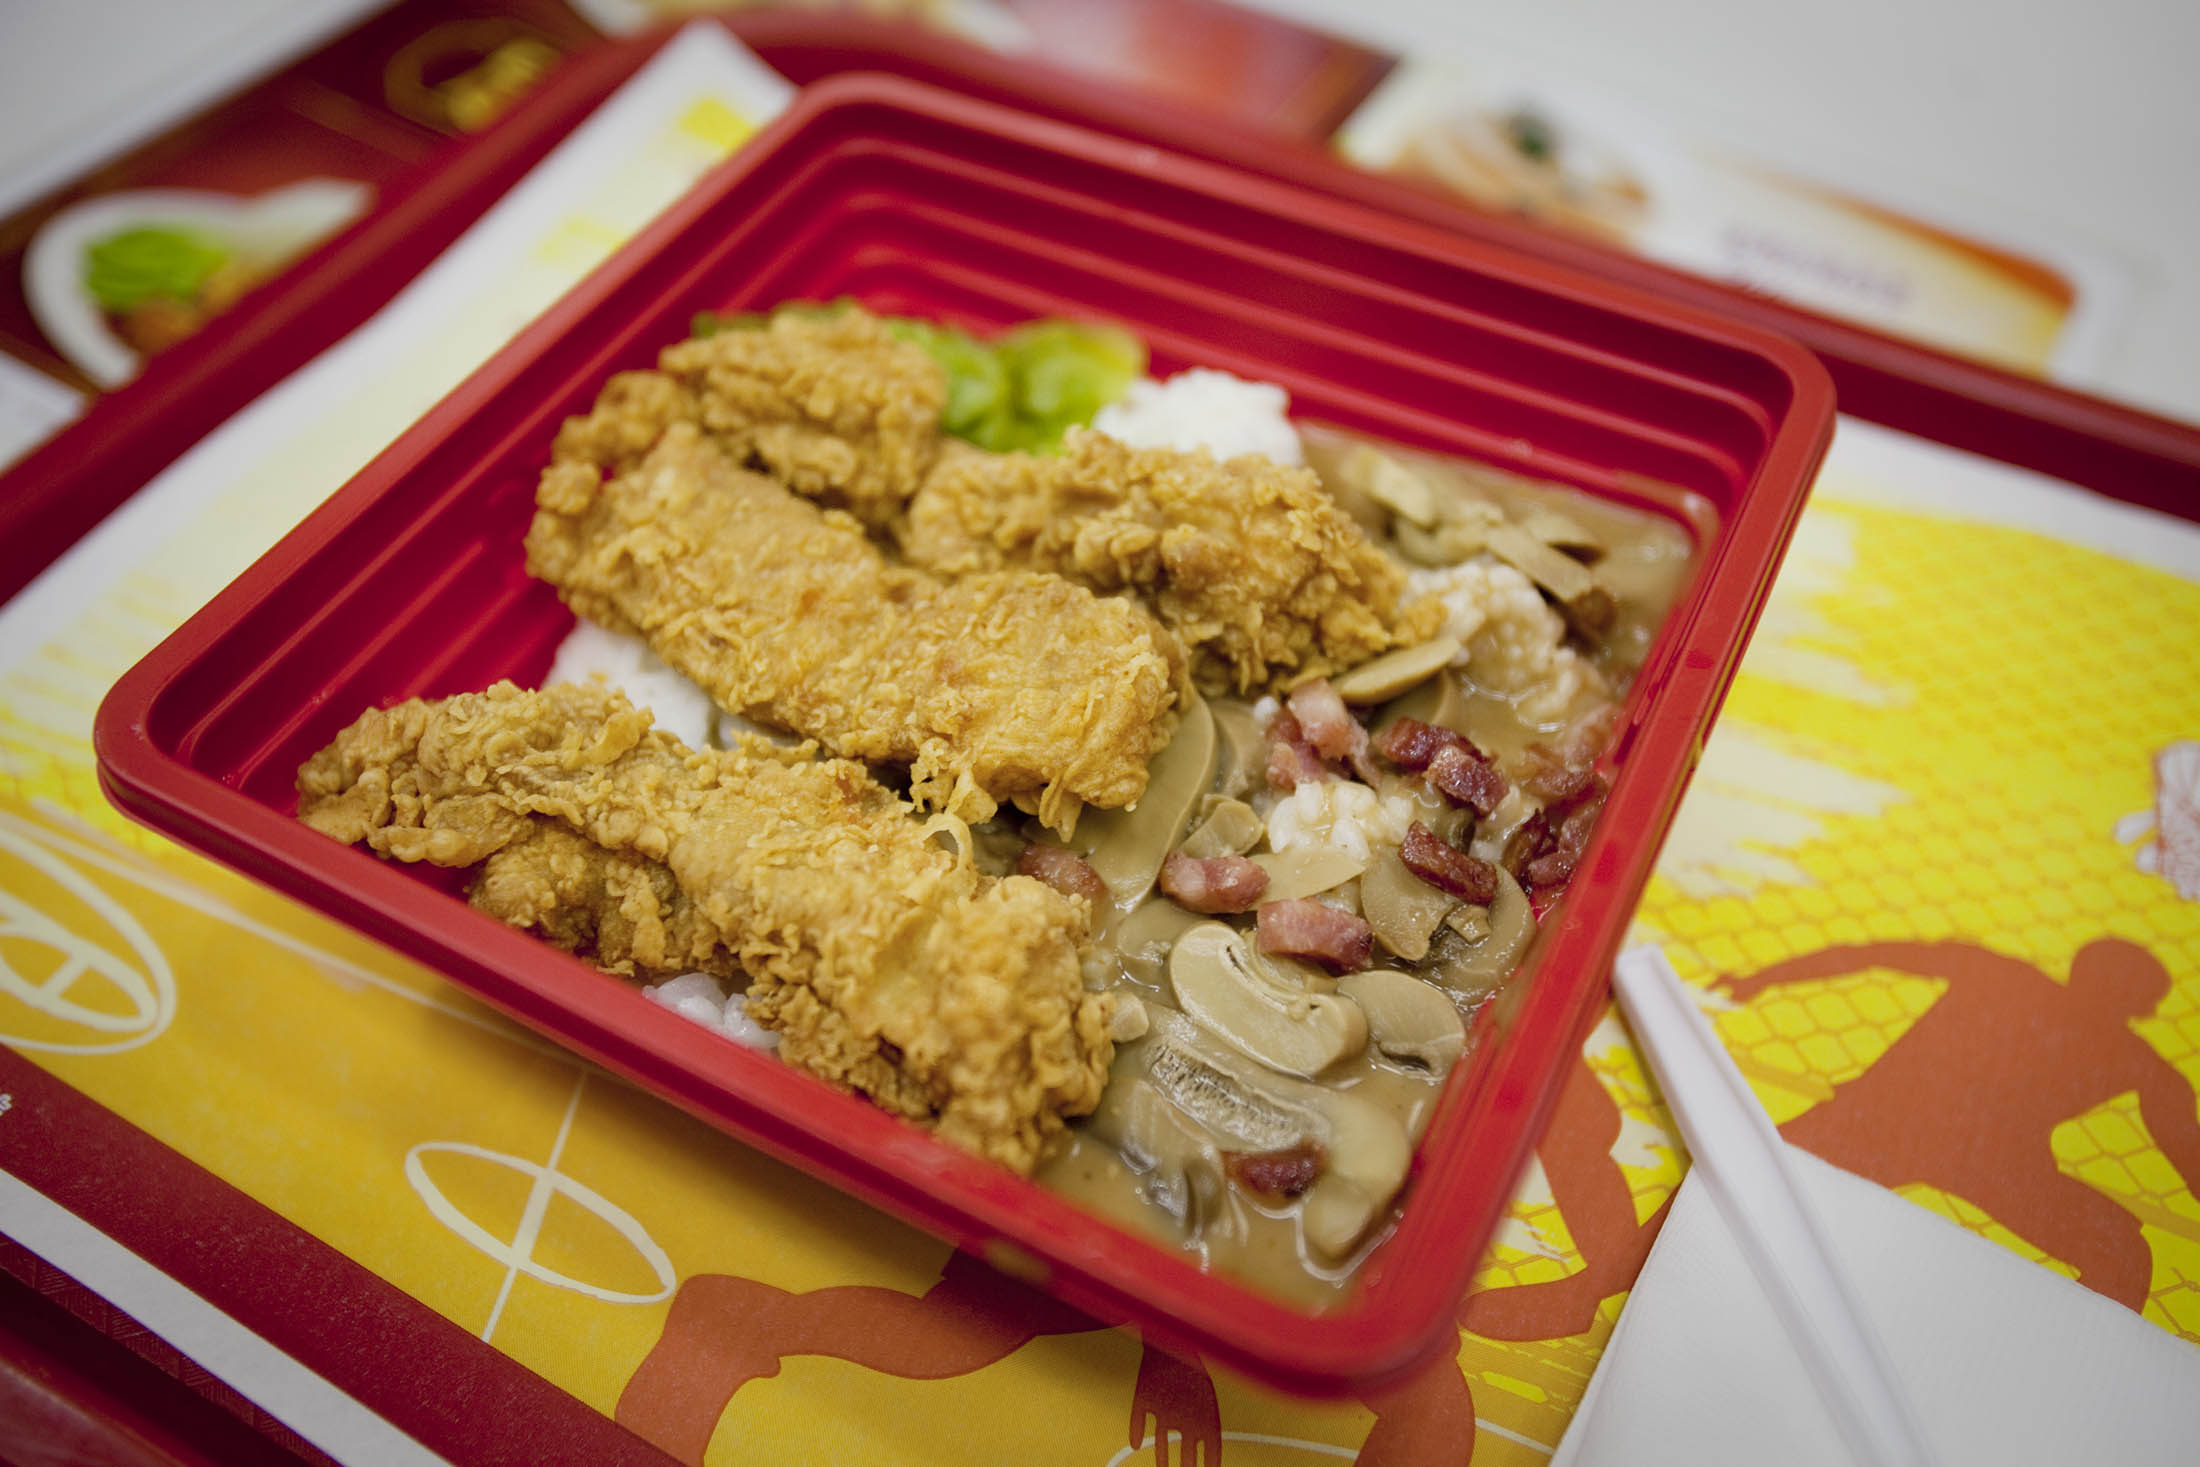 A bacon, mushroom and chicken rice dish is served to a customer at a KFC restaurant in Beijing.
